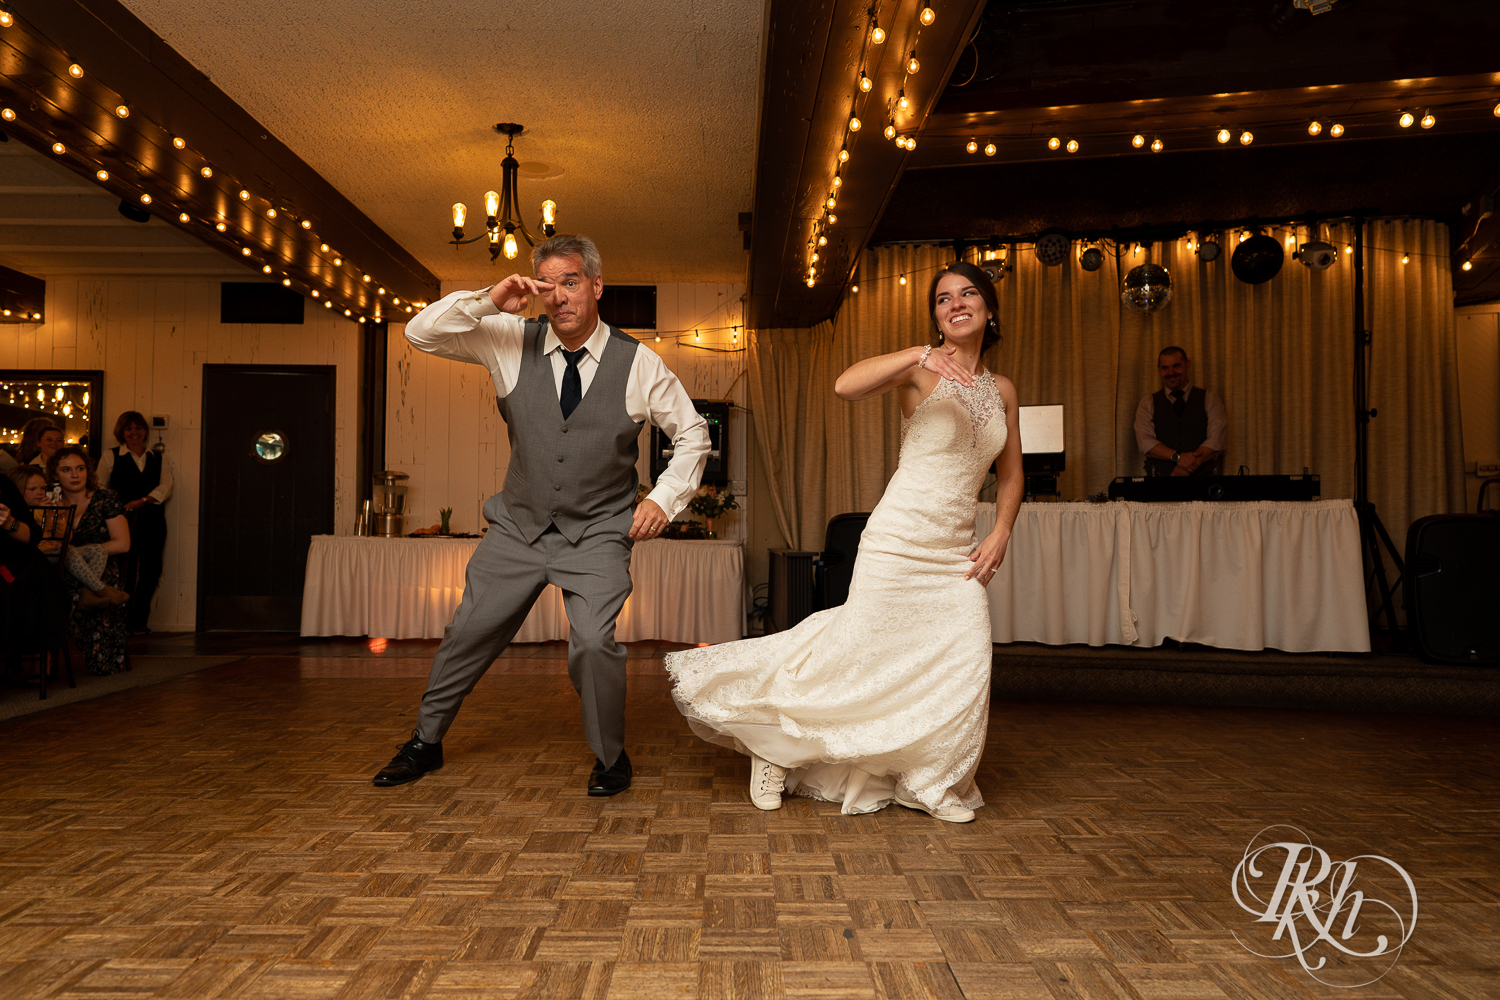 Bride and her dad dance during wedding reception at The Chart House in Lakeville, Minnesota.